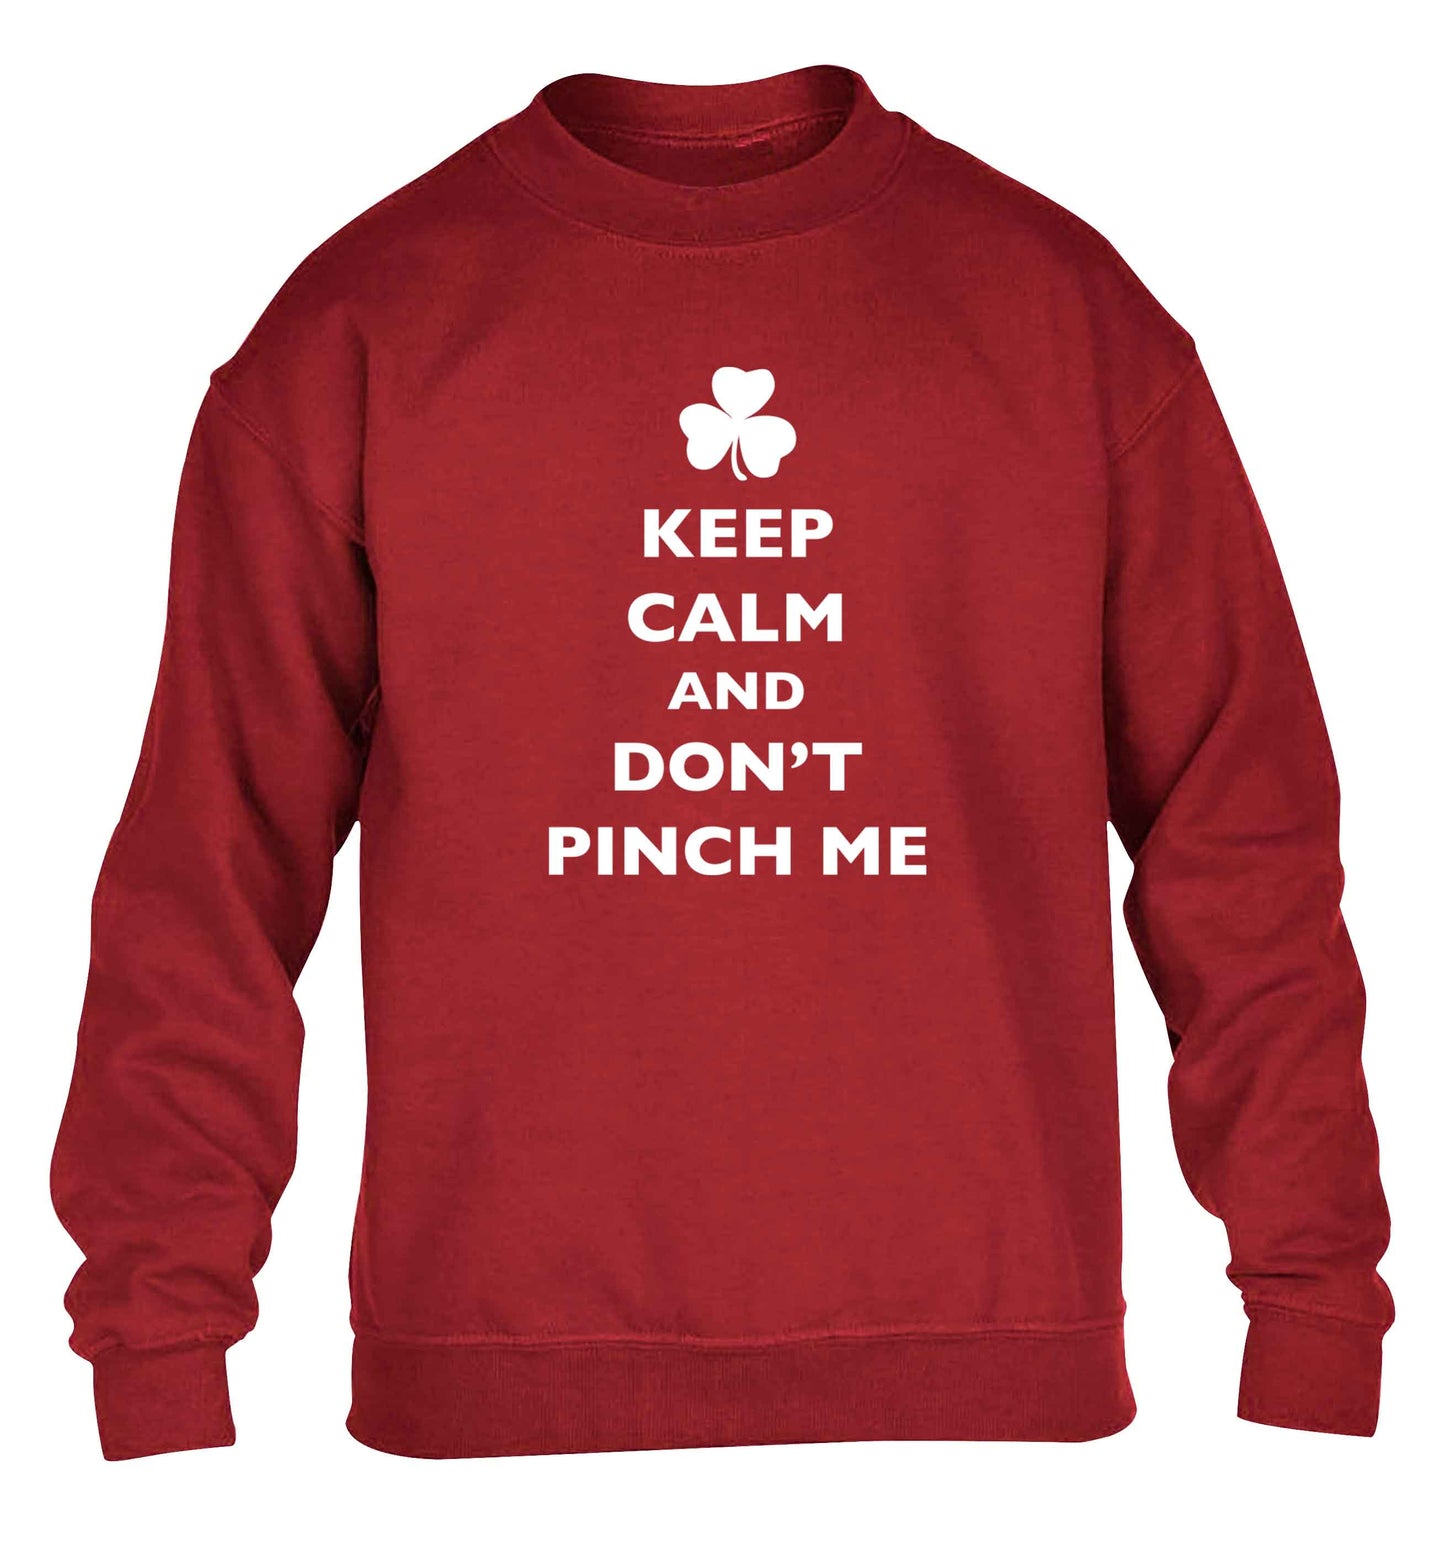 Keep calm and don't pinch me children's grey sweater 12-13 Years